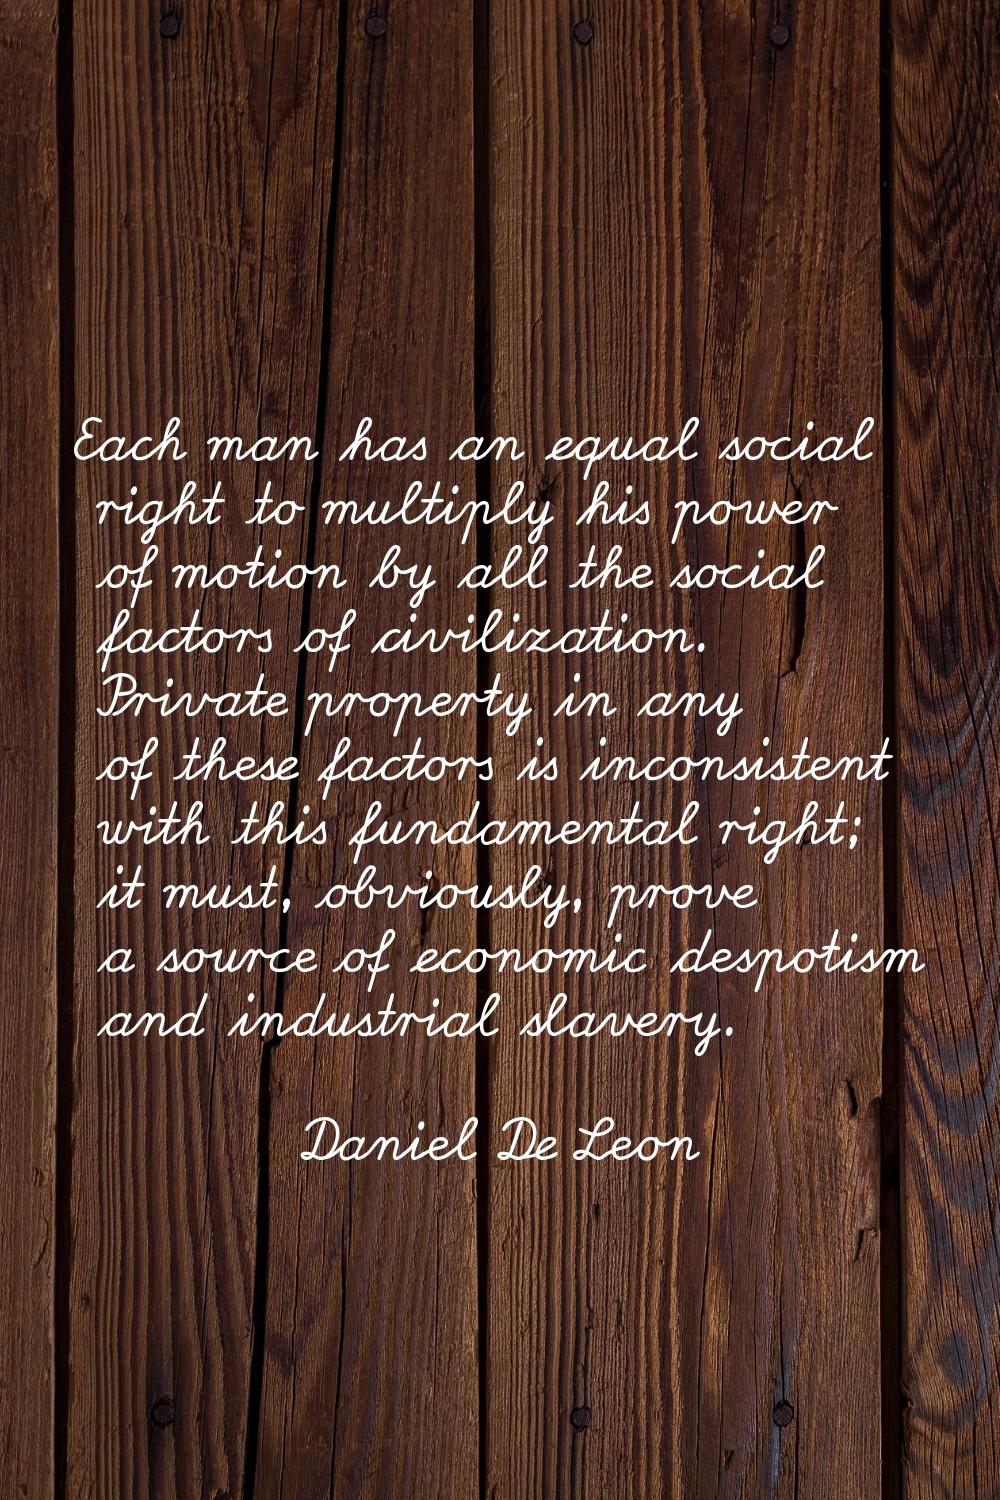 Each man has an equal social right to multiply his power of motion by all the social factors of civ